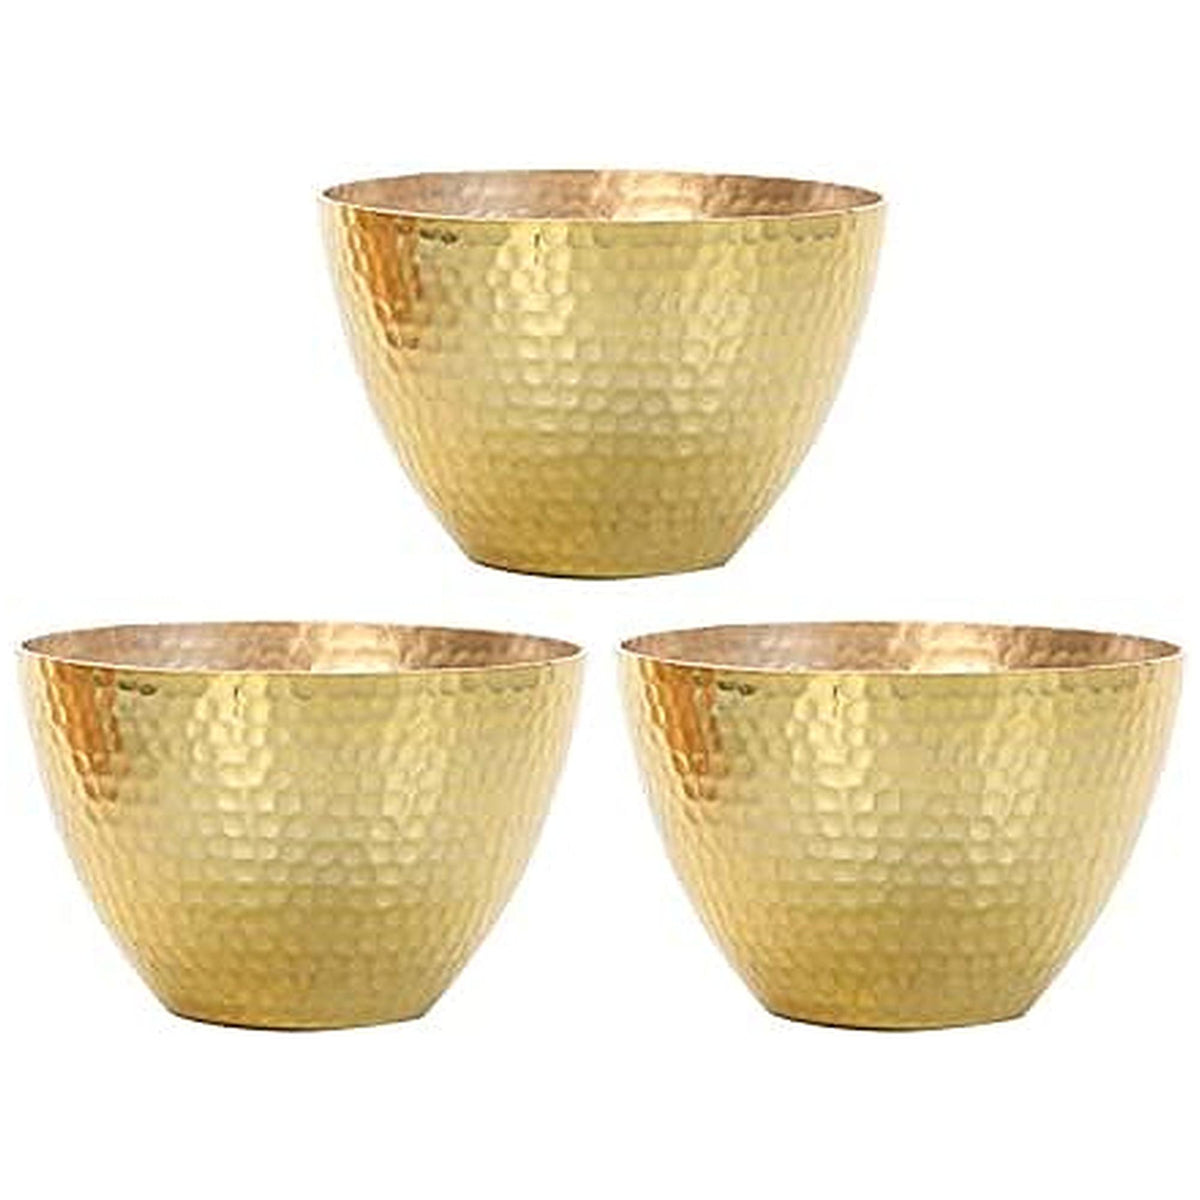 HOSLEY®  Metal Hammered Filled Candle, Lemon Thyme Scented Gold Finish, Set of 3, 4.5 inches Diameter